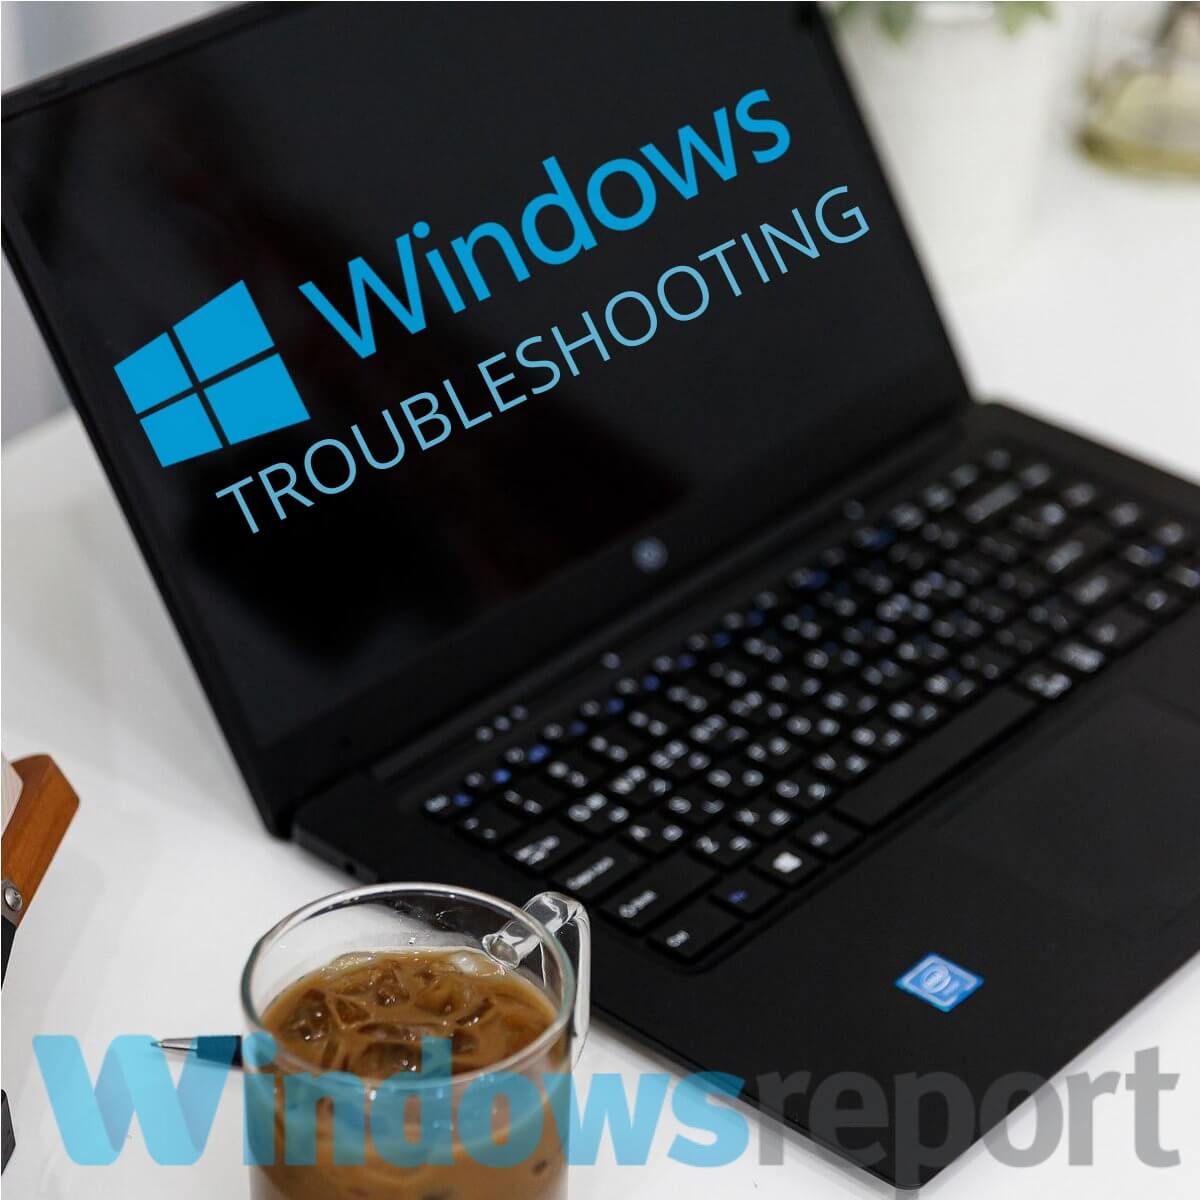 Disabled Administrator Account on Windows 10